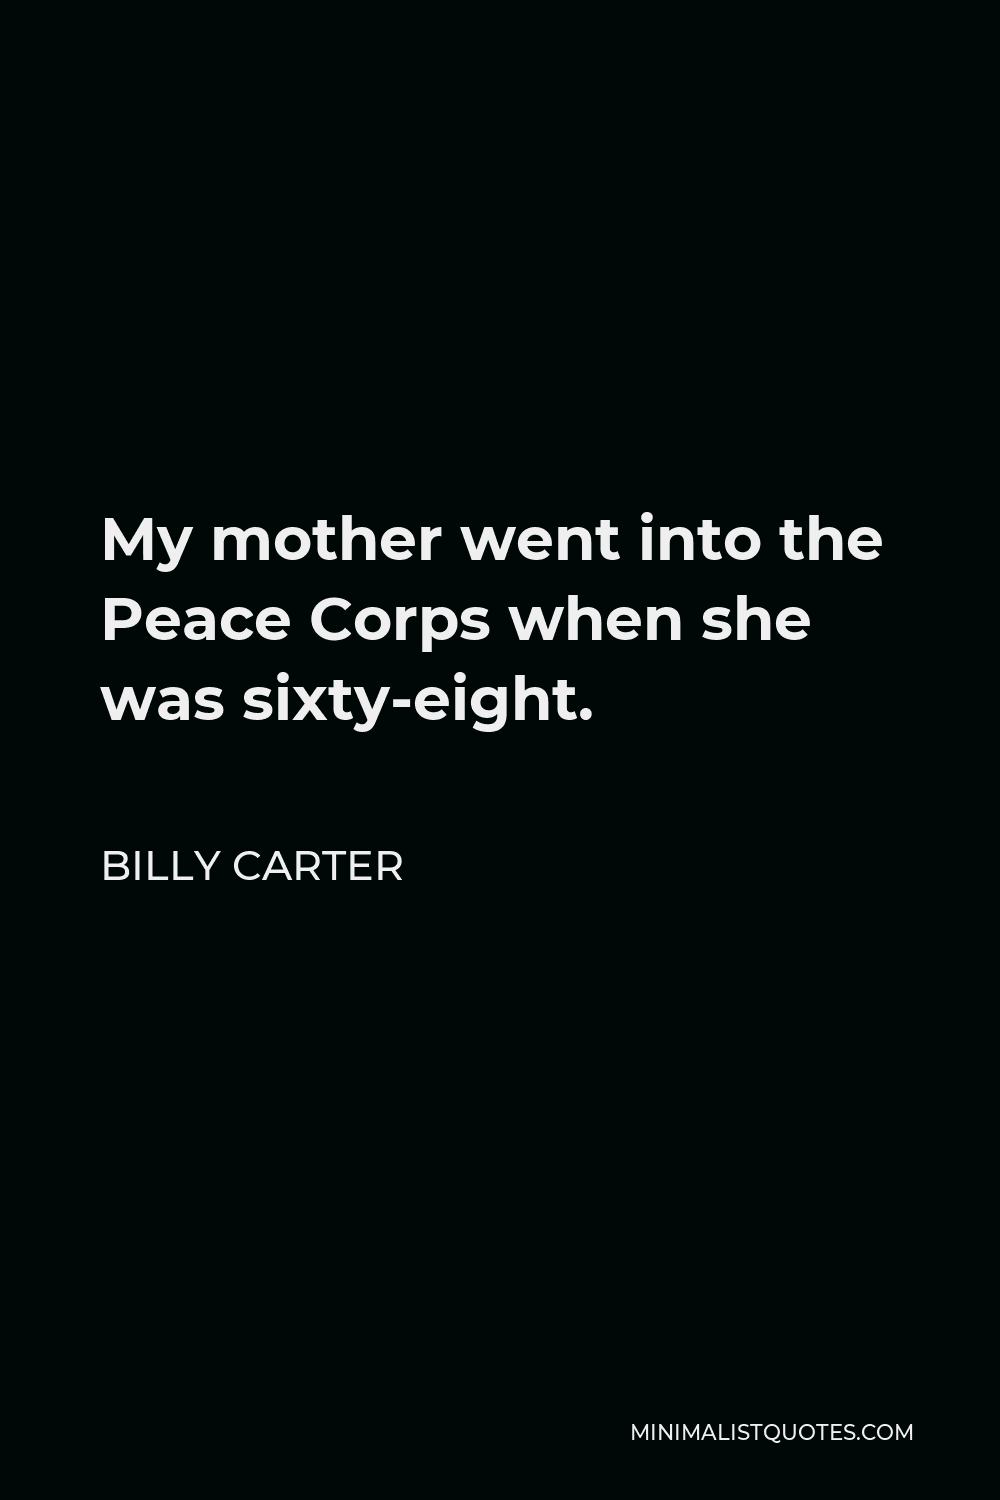 Billy Carter Quote - My mother went into the Peace Corps when she was sixty-eight.